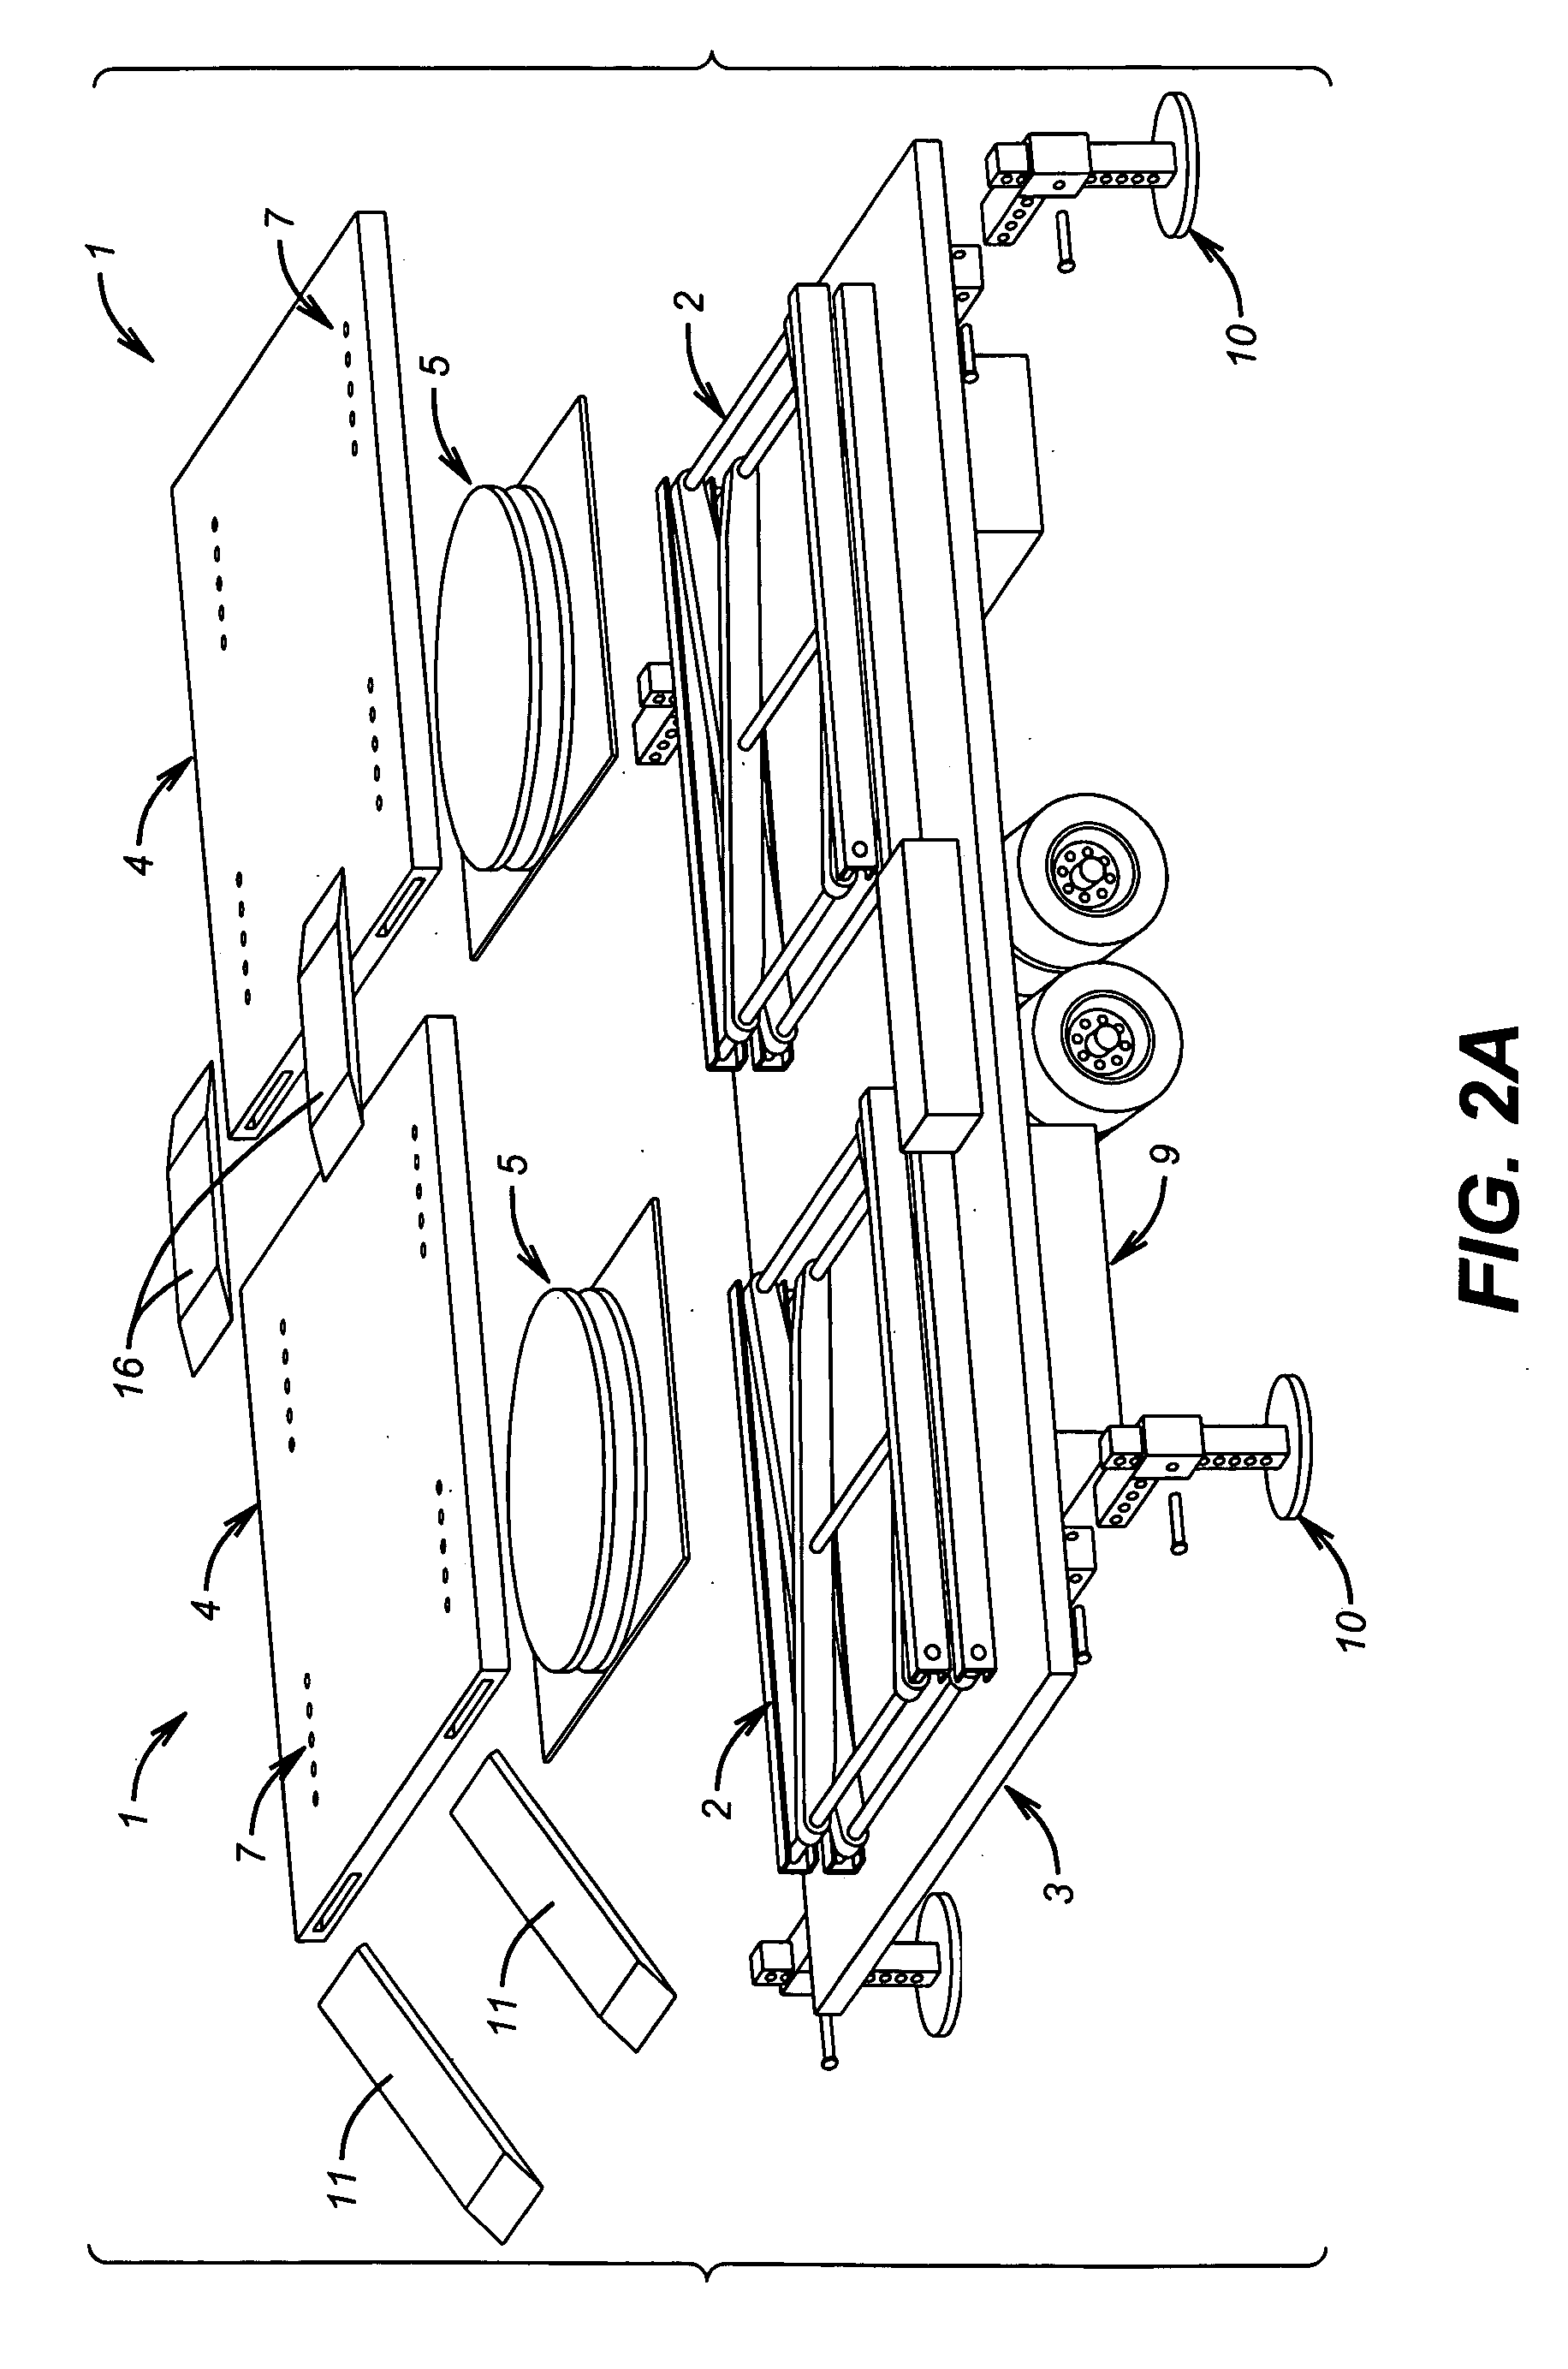 System for displaying a motor vehicle, apparatus and related methods